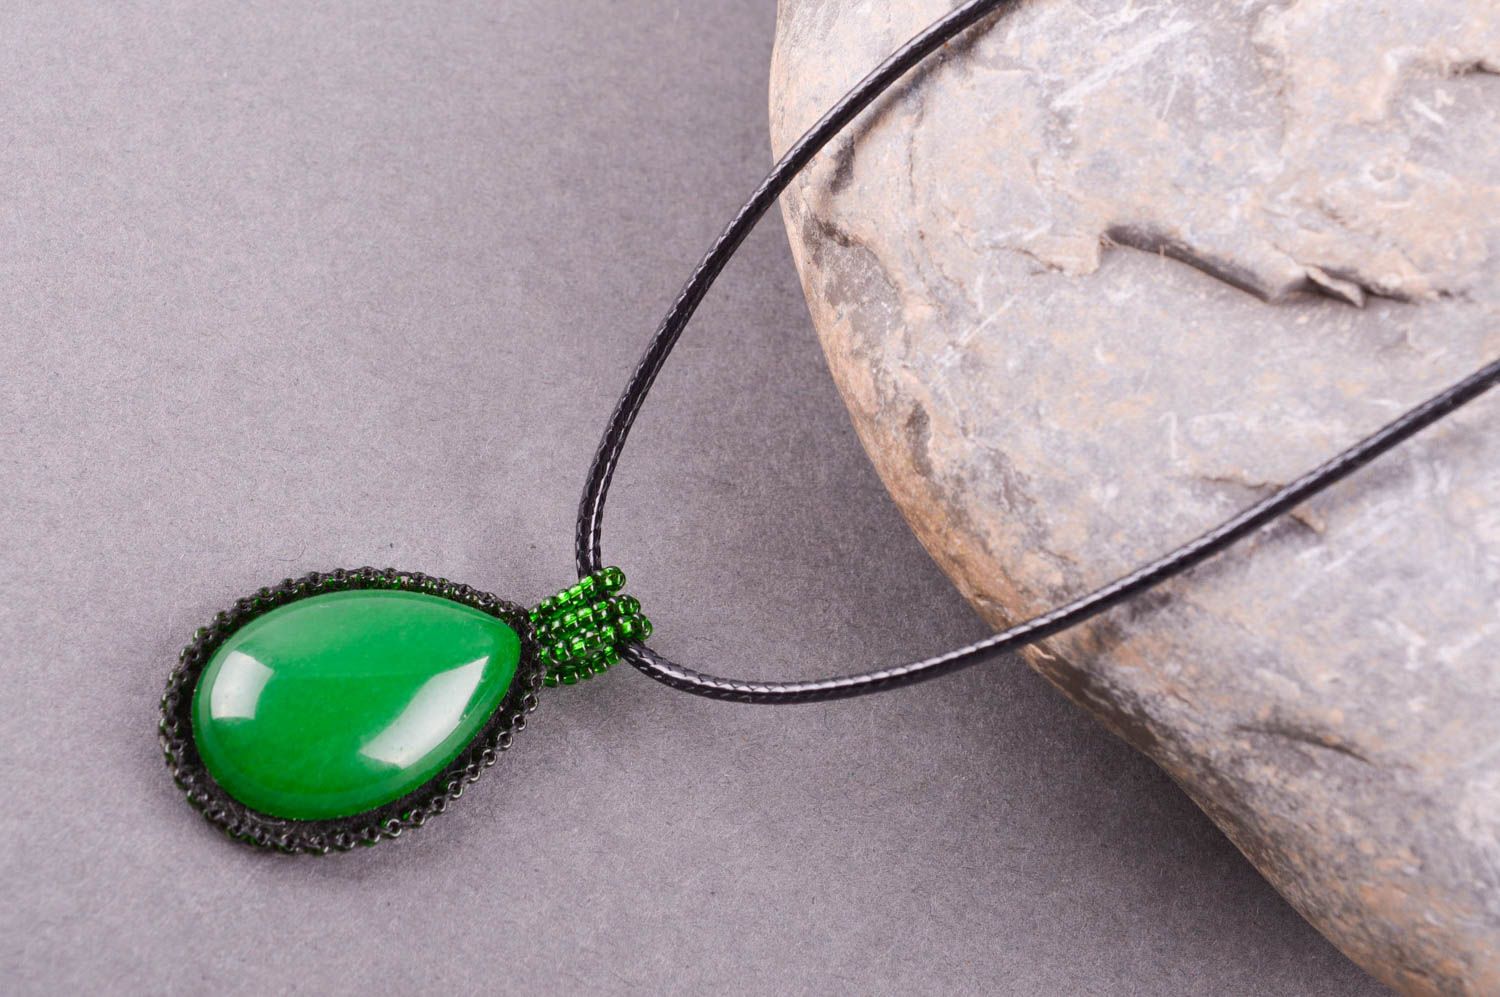 Handmade pendant necklace gemstone jewelry women accessories gifts for girls photo 1